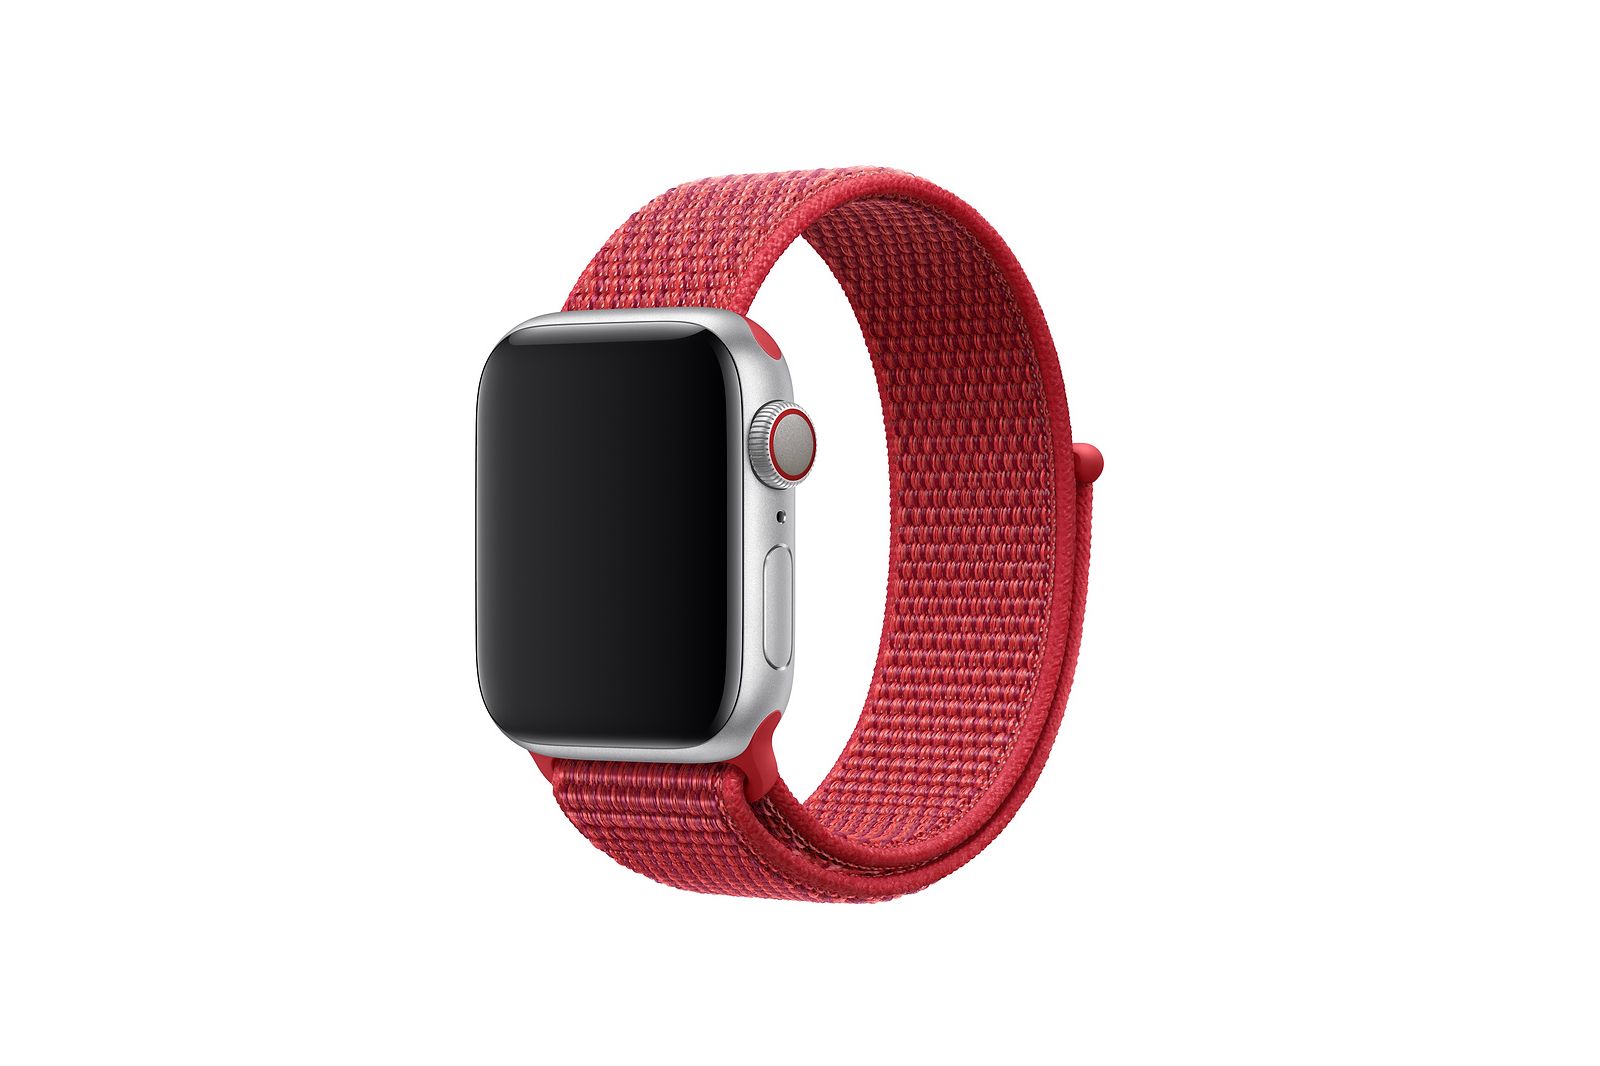 Great Productred Gadgets To Help You Show Your Support For World Aids Day image 2